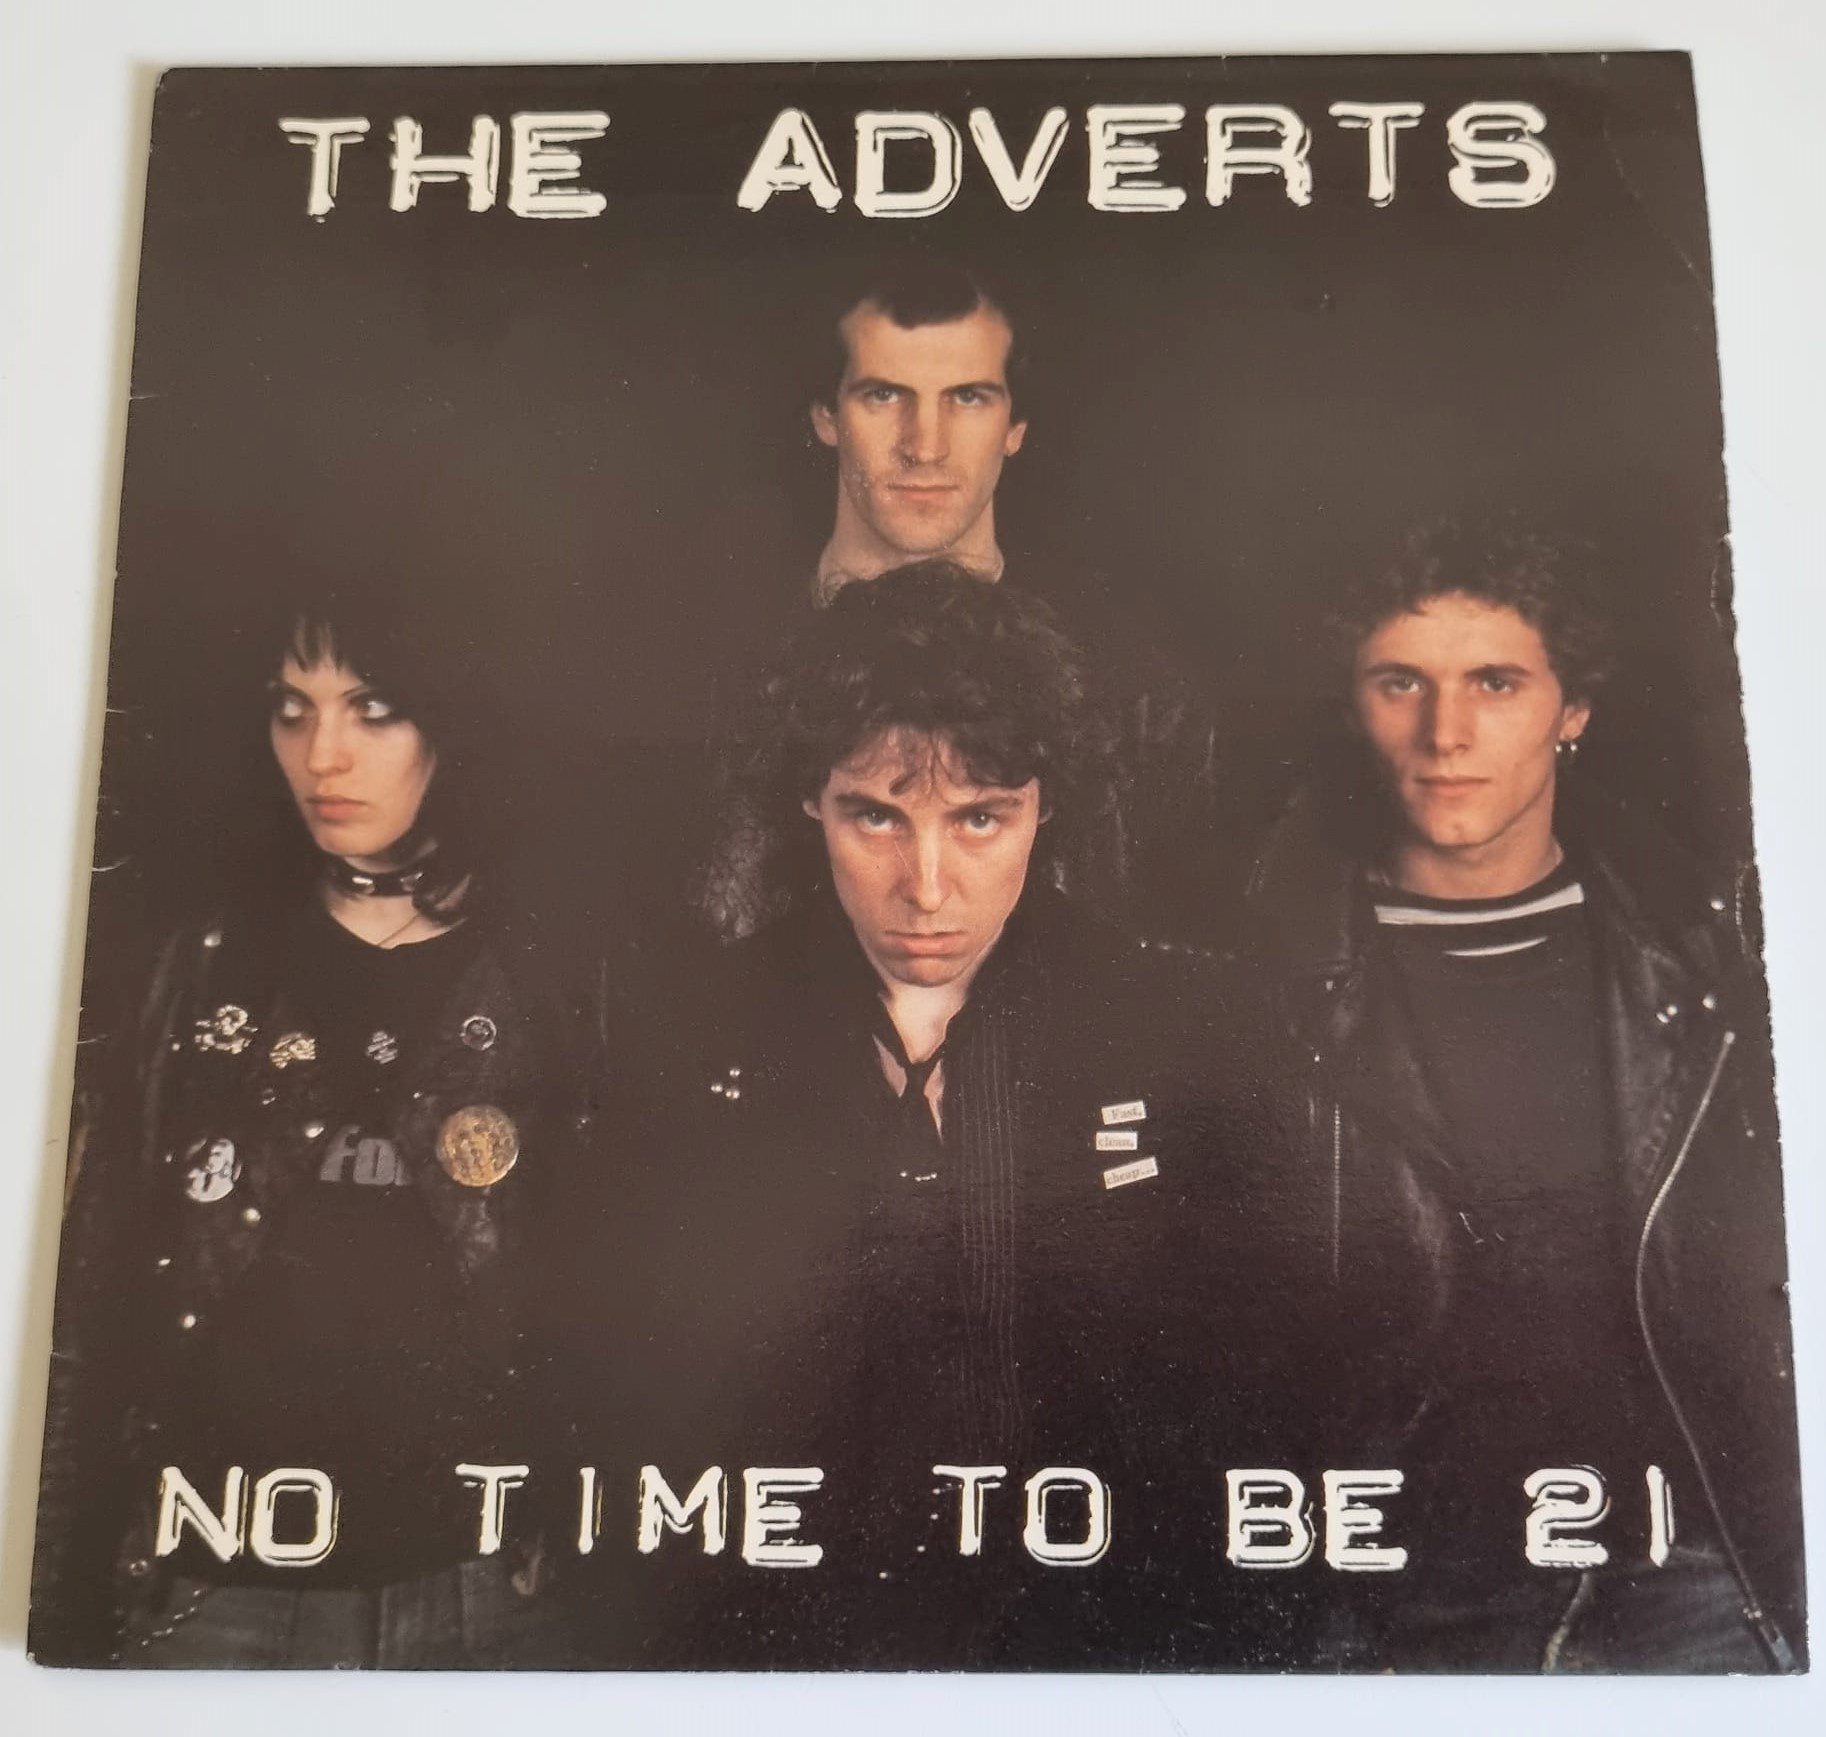 Buy this rare Adverts record by clicking here